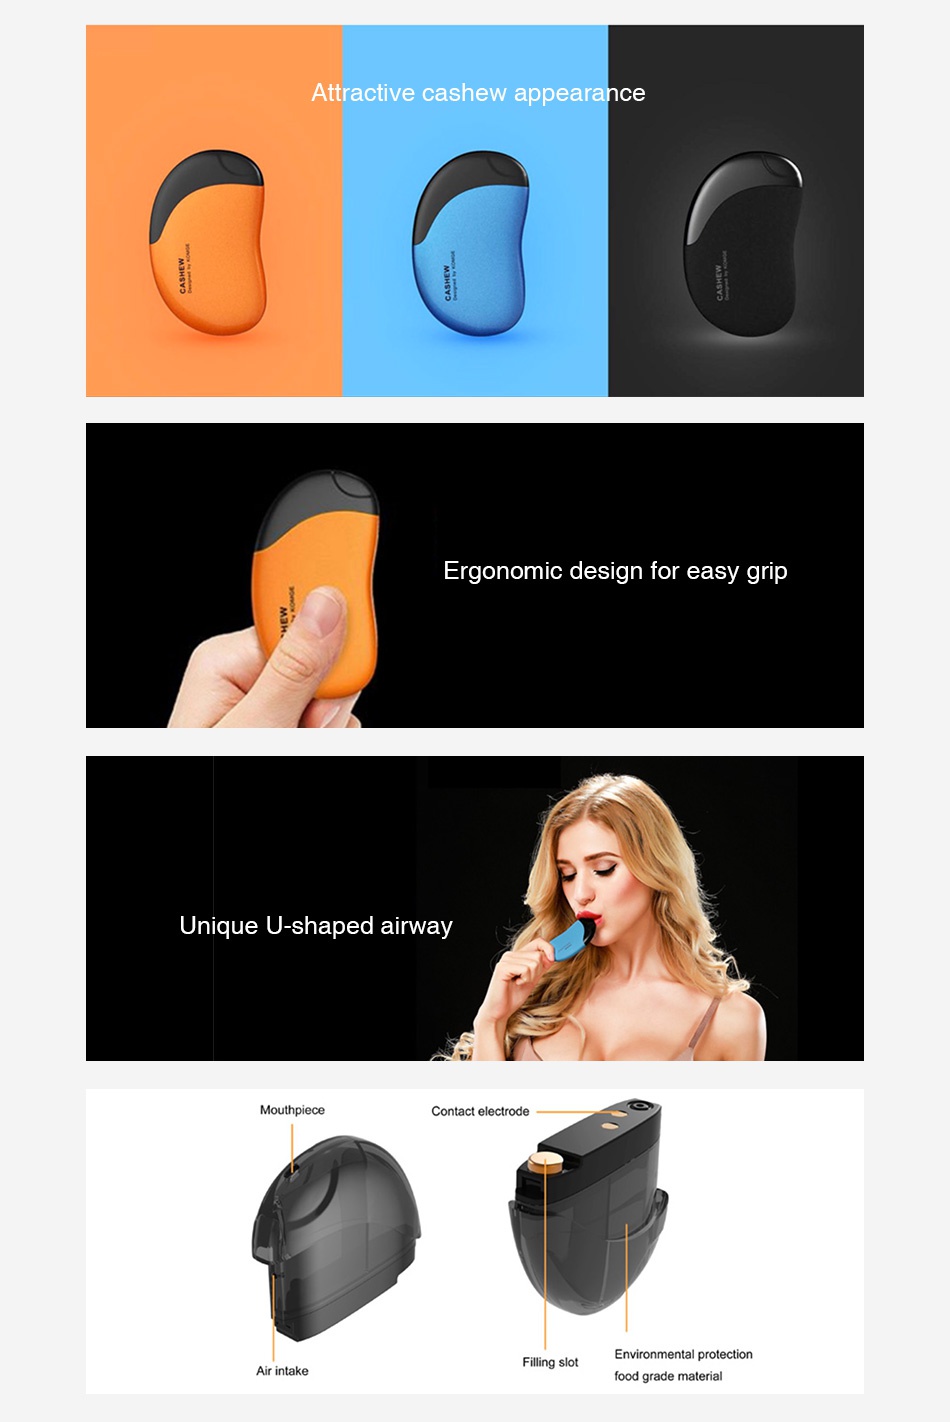 KOMGE Cashew AIO Pod Kit 380mAh Attractive cashew appearance Ergonomic design for easy grip Unique U shaped airway Contact electrode Filling slot Environmental protection Air intake food grade material